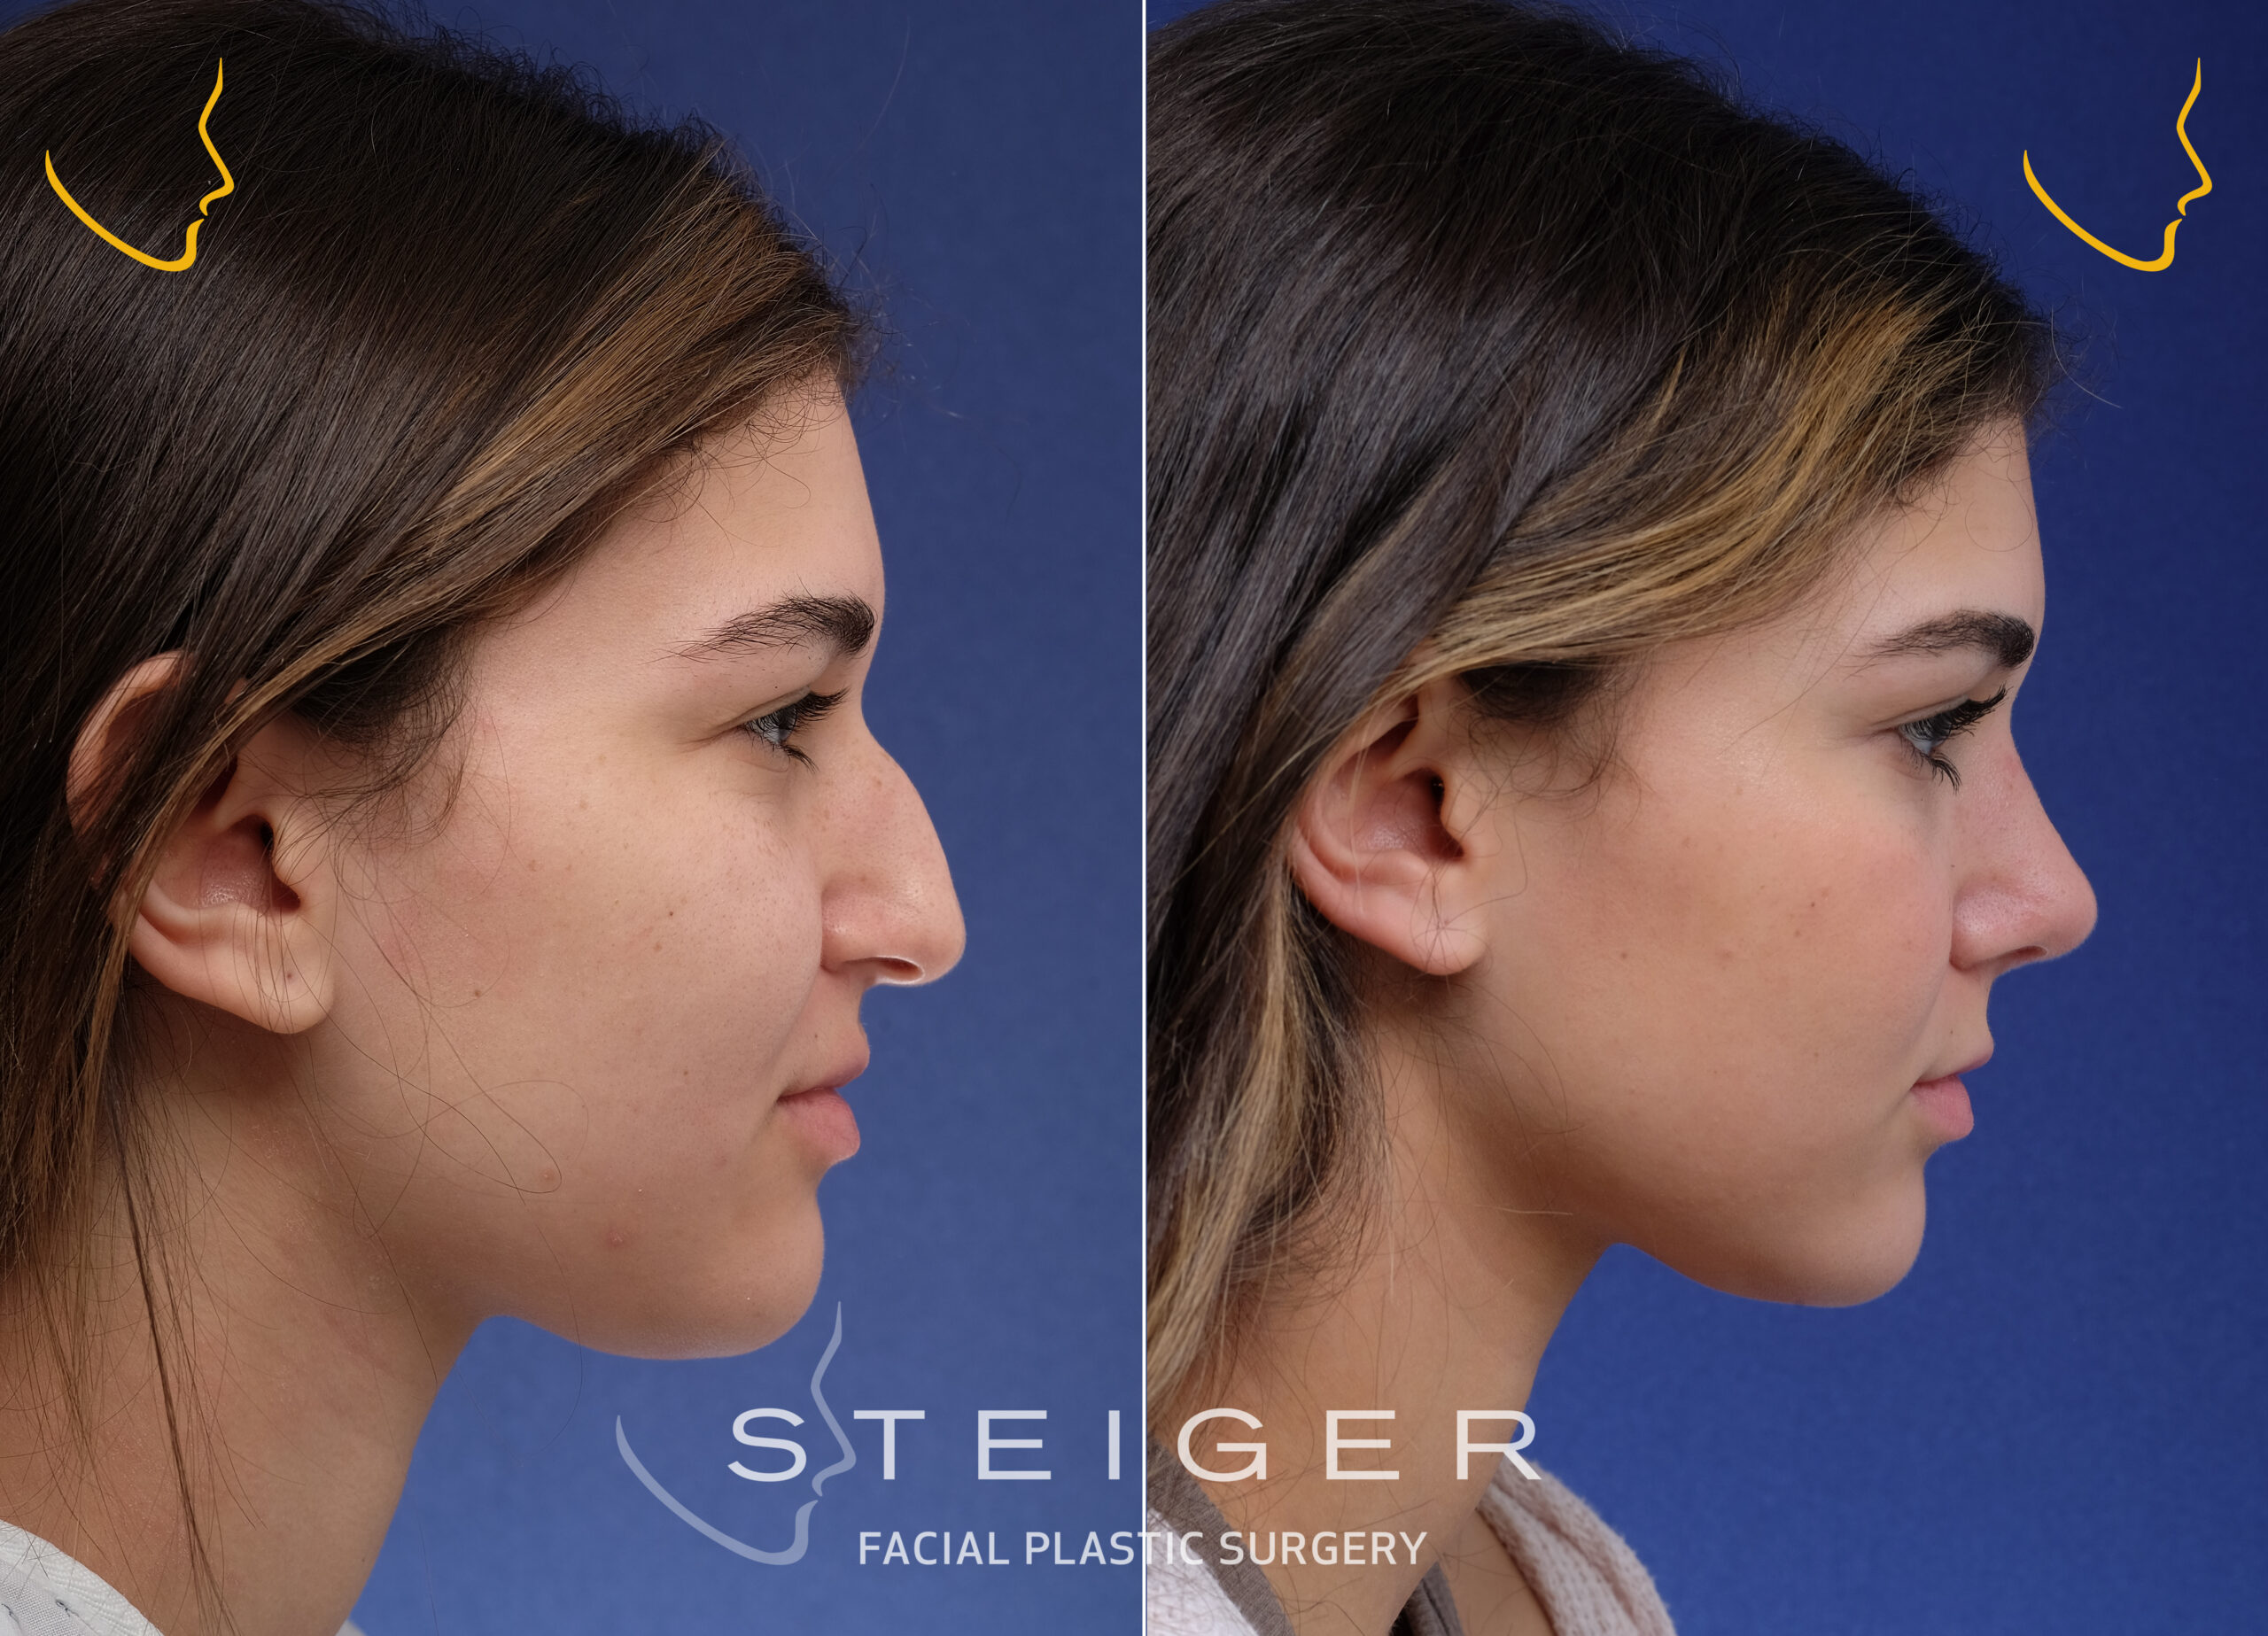 Plastic Surgery Before And After Nose Jobs Before And After Ac